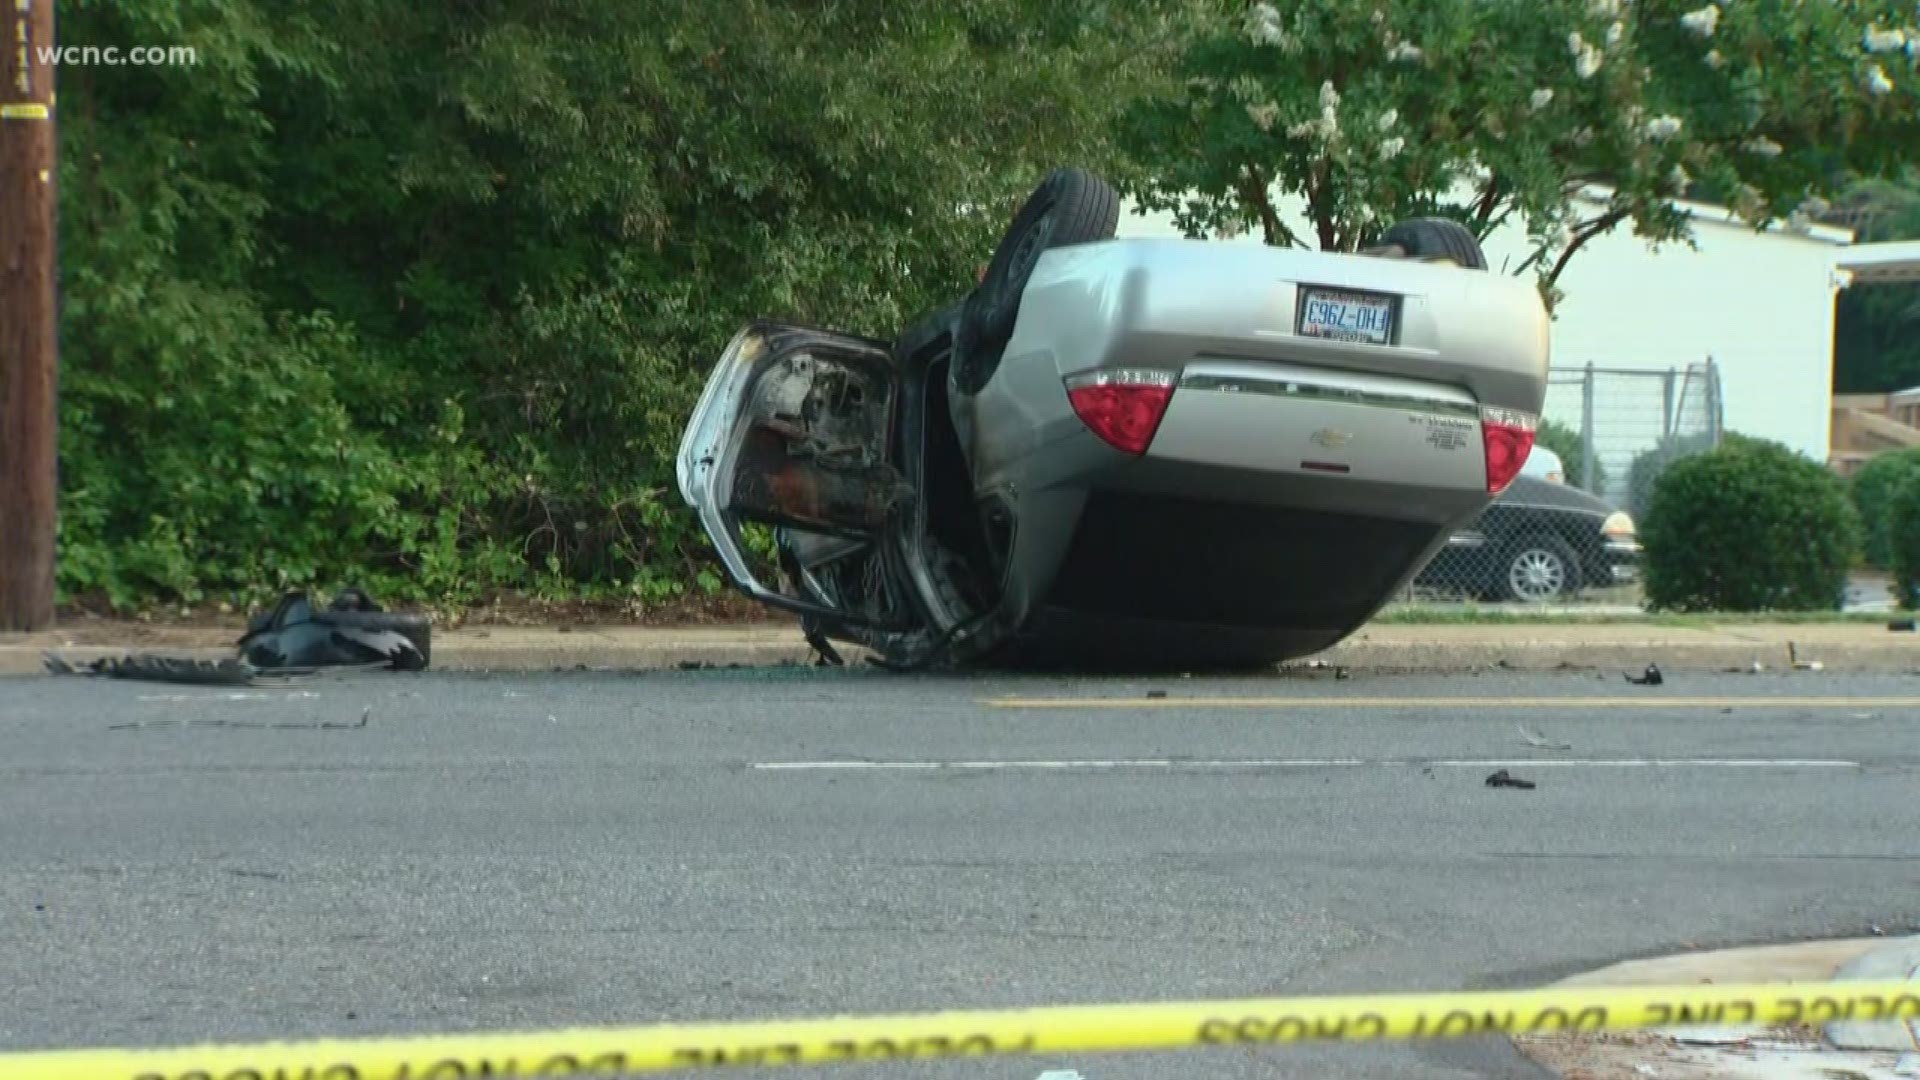 Police are investigating a single-car crash that left one person dead in east Charlotte Sunday morning.